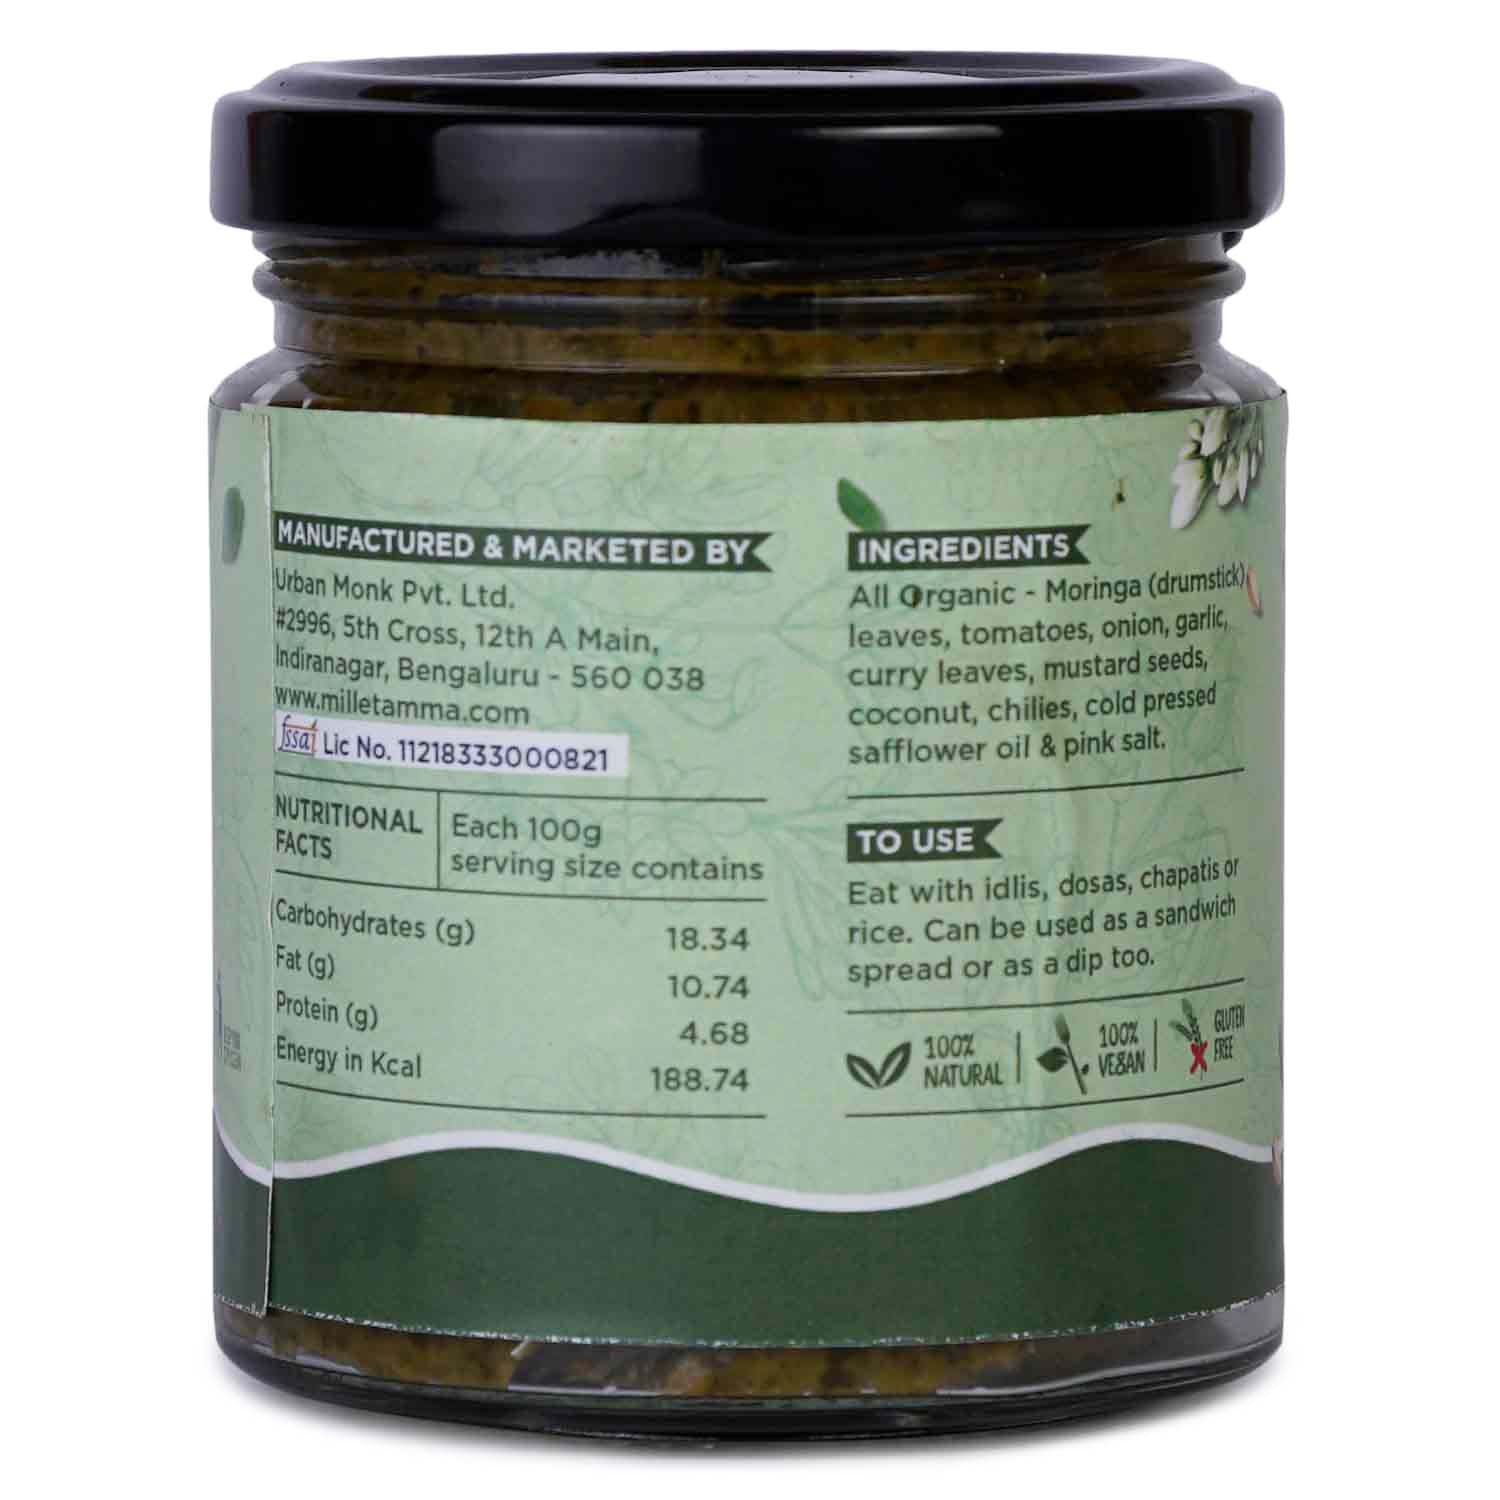 Millet Amma’s Organic Moringa Chutney- Millet Amma’s flavourful Organic Moringa Chutney is a great replacement for all your chutney needs.  Made from Moringa leaves, Garlic, Tomato and Safflower Oil, this chutney is not only extremely delicious but also very healthy.  This chutney is rich in vitamins, minerals and antioxidants that aids in reducing inflammation and lowering cholesterol levels.